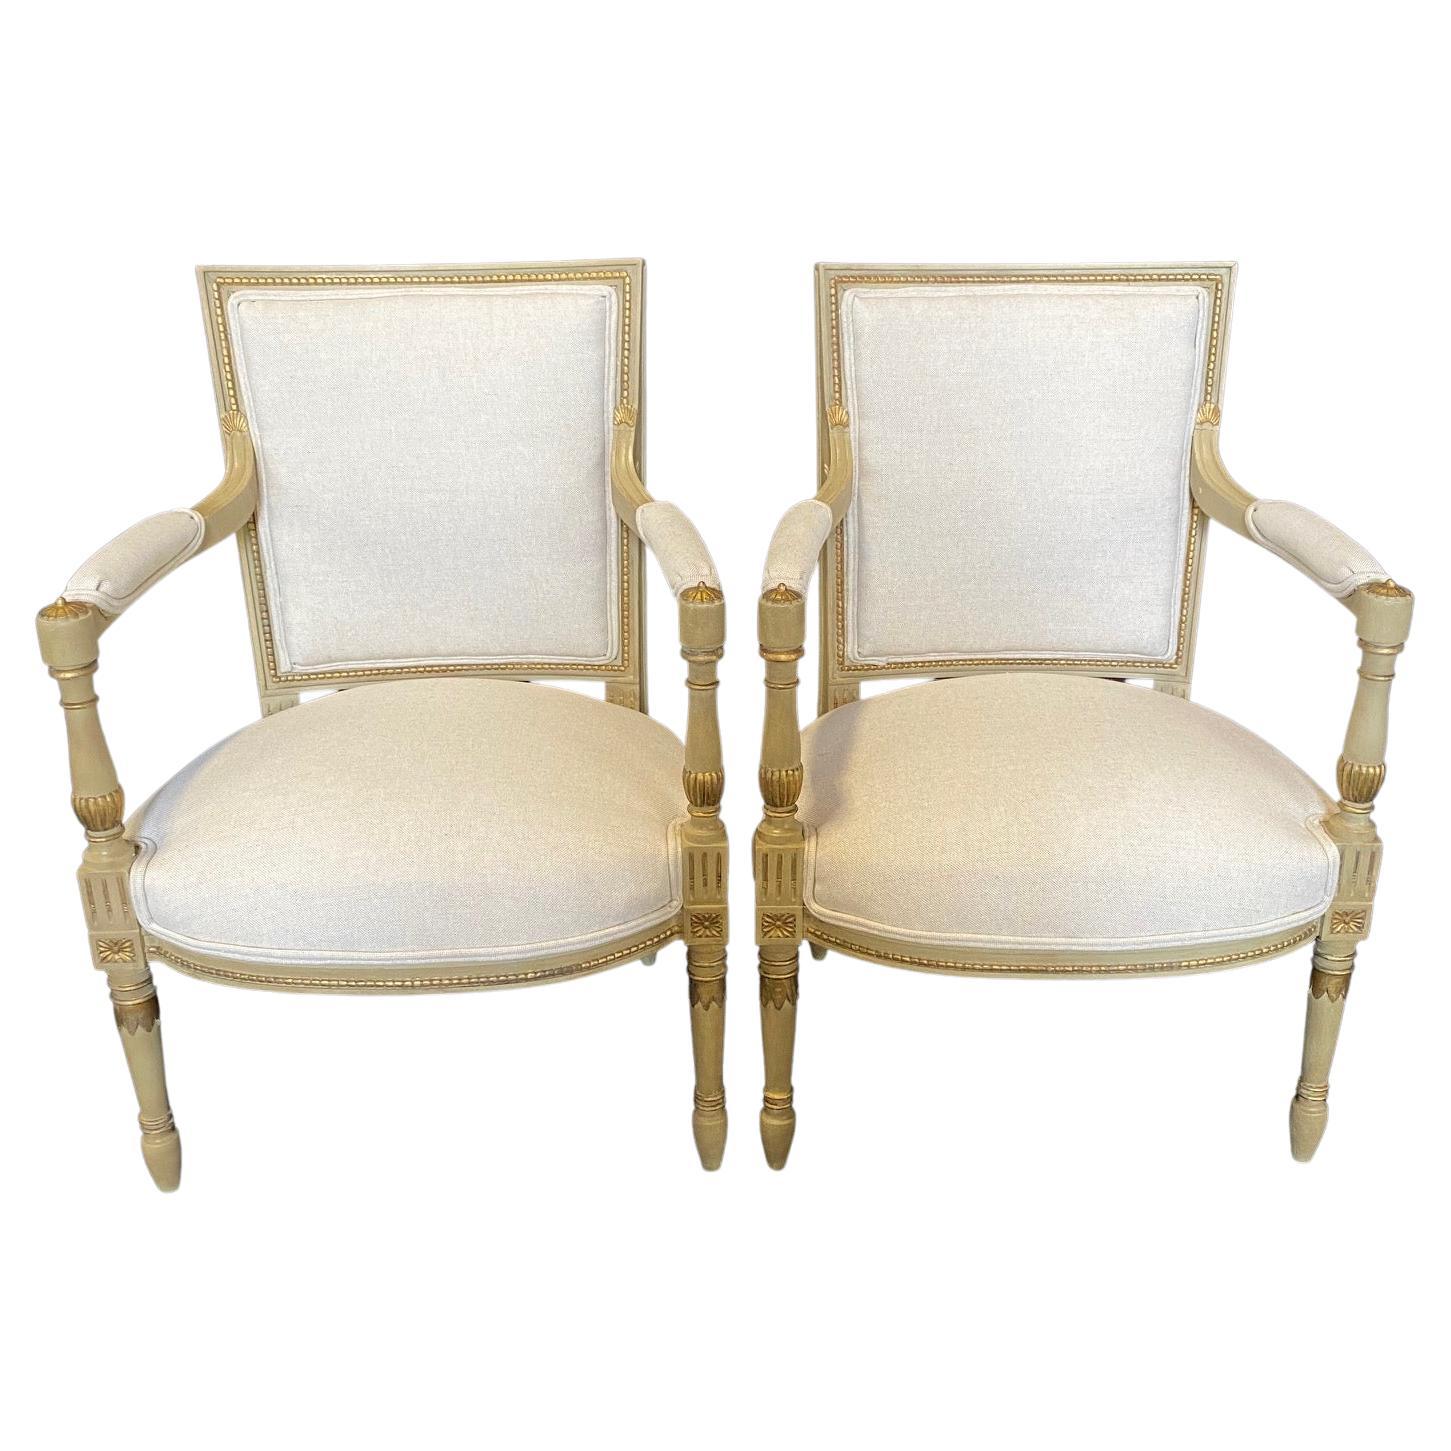 Stunning Pair of 19th Century French Neoclassical Armchairs